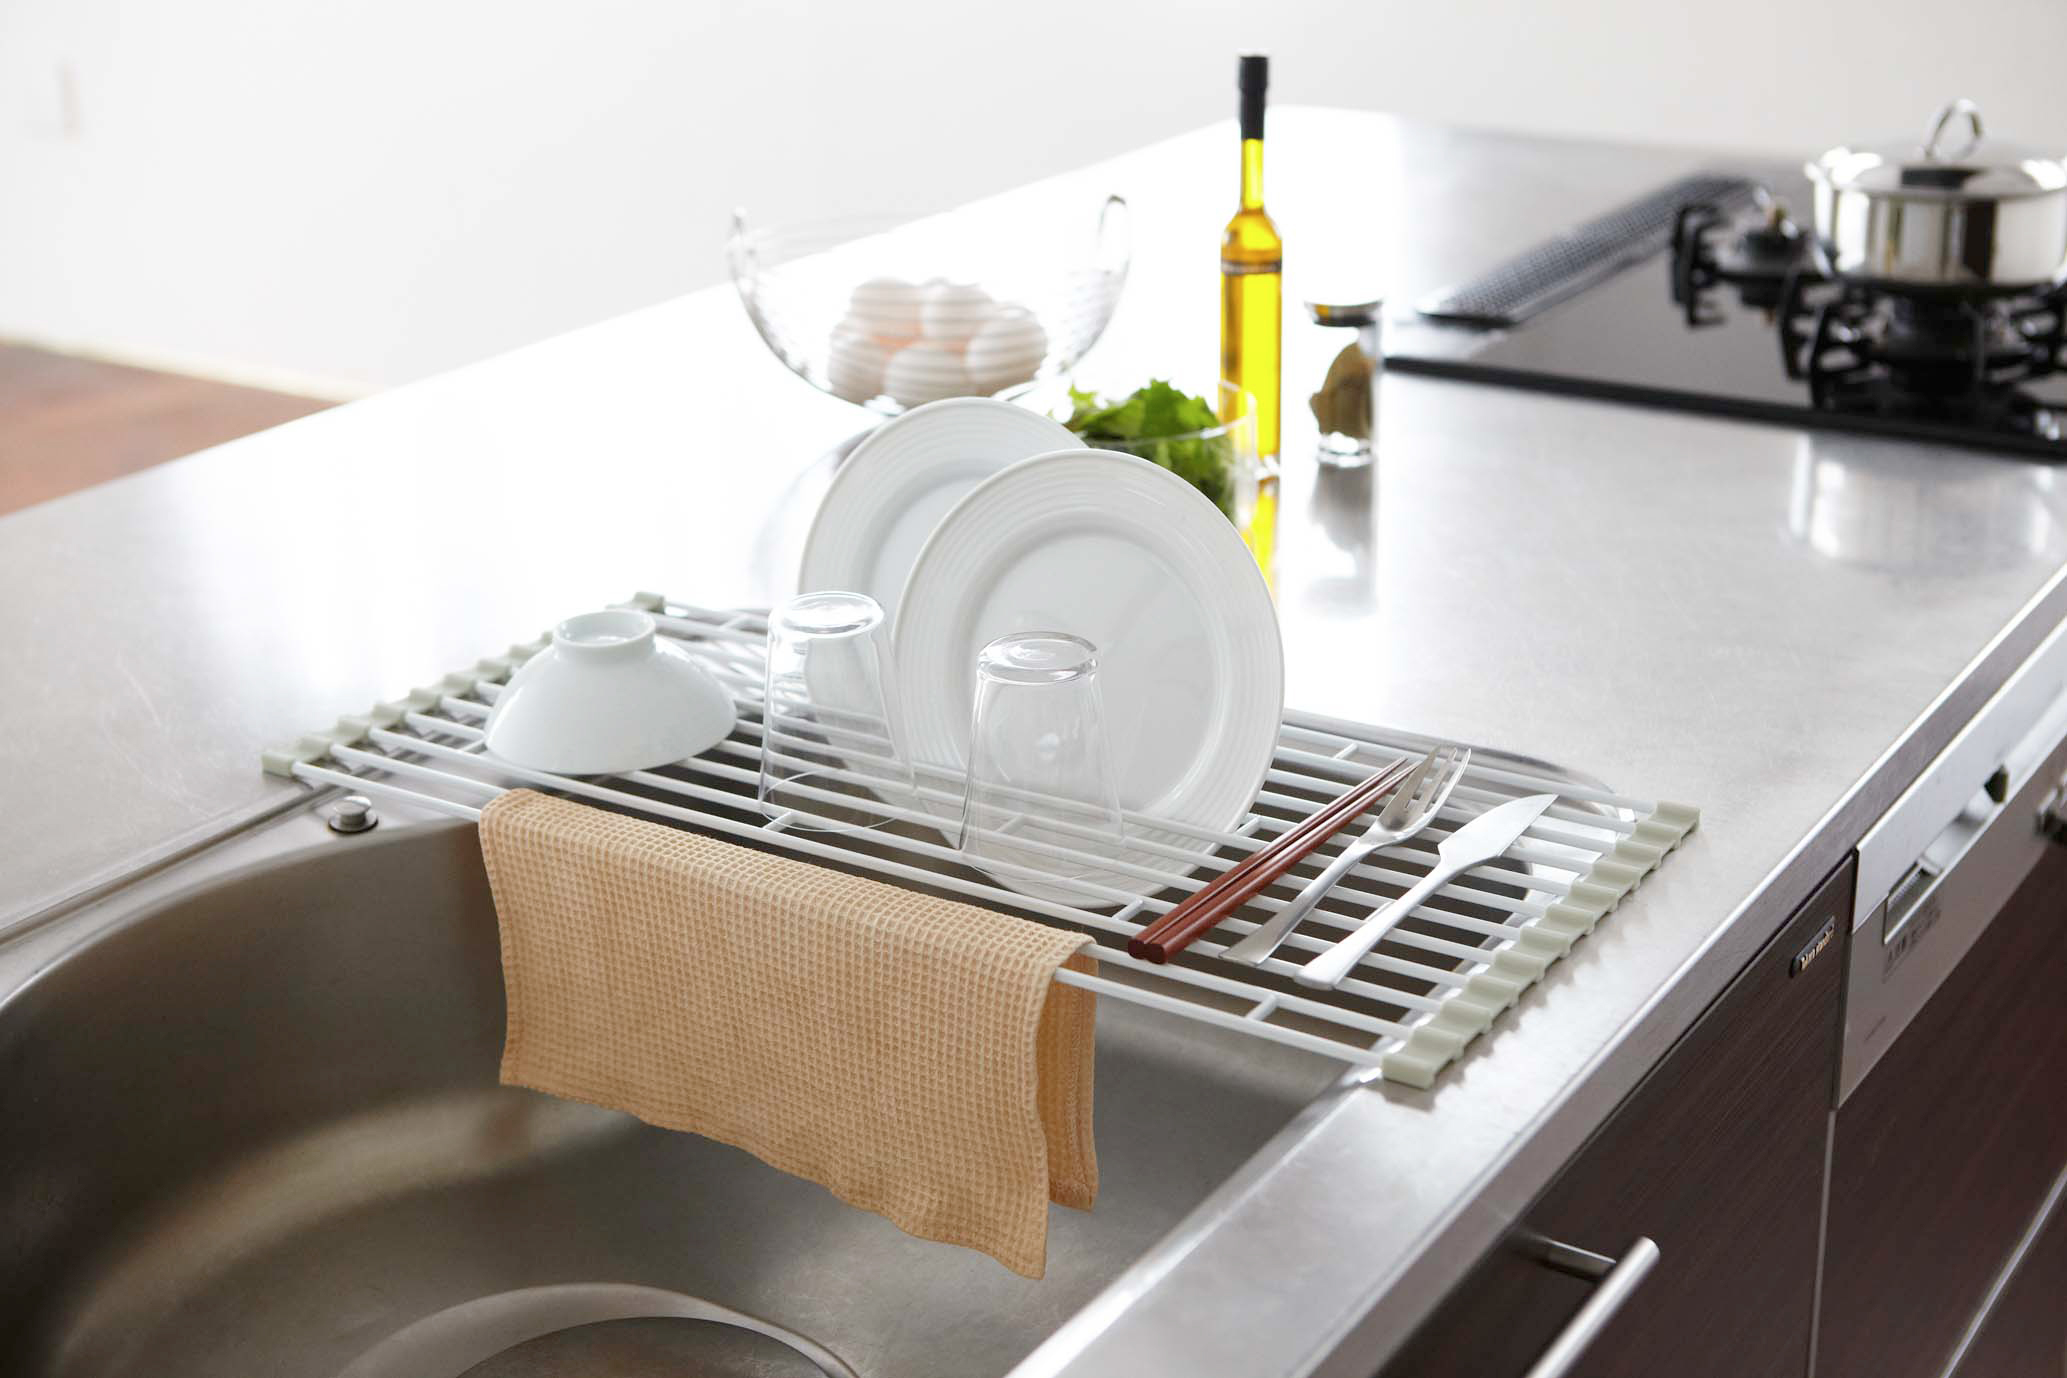 Yamazaki Home Over-the-Sink Dish Drainer holding dishes, cups, bowl, utensils, and dish rag over kitchen sink.